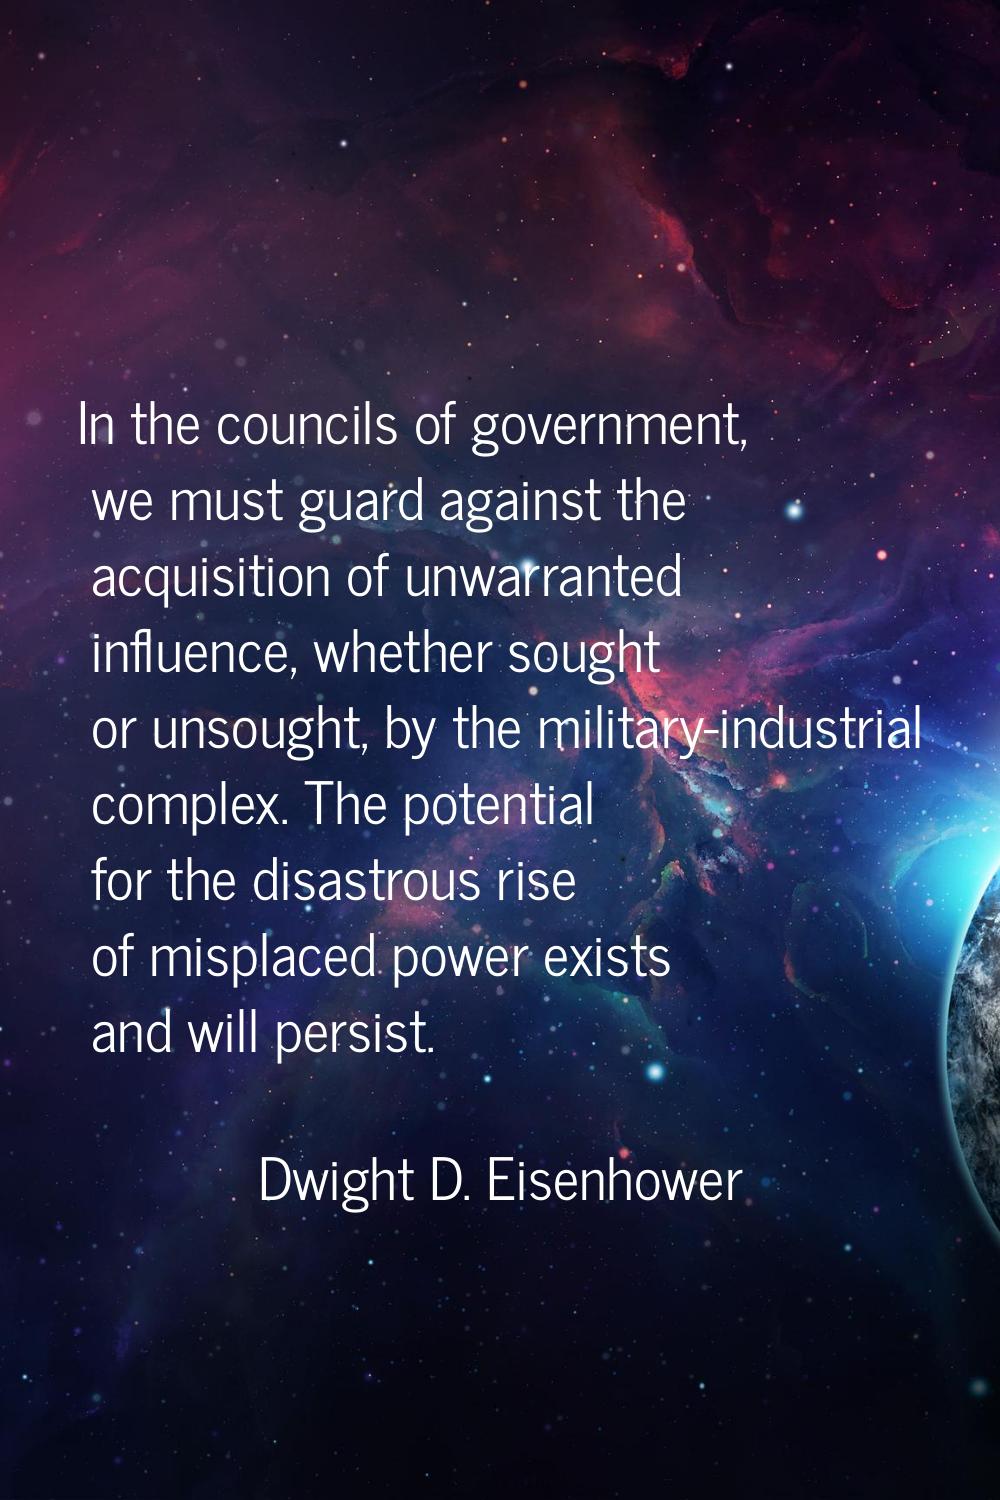 In the councils of government, we must guard against the acquisition of unwarranted influence, whet